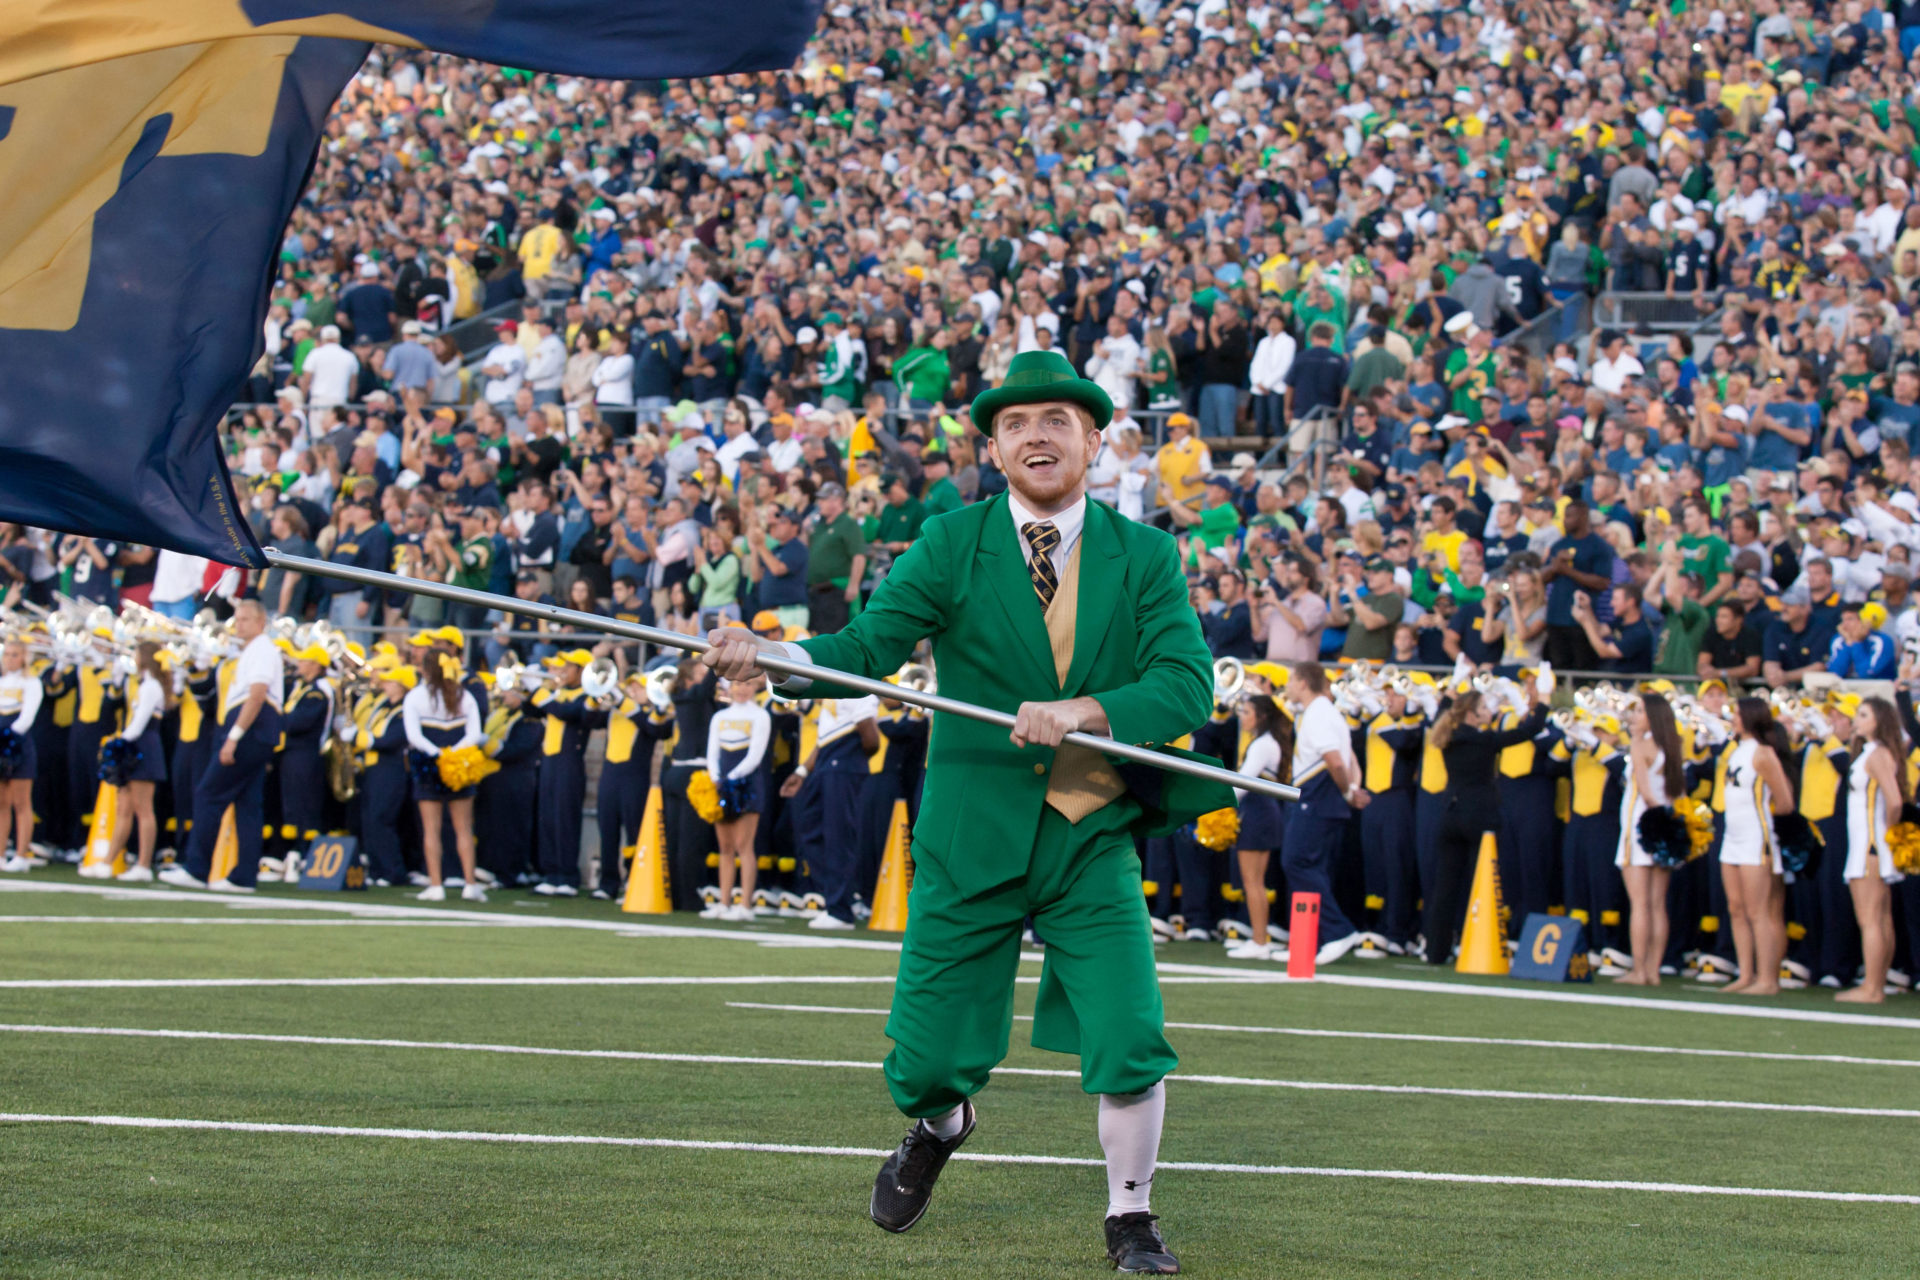 The Notre Dame leprechaun waves the Notre Dame flag prior to the game against Michigan.